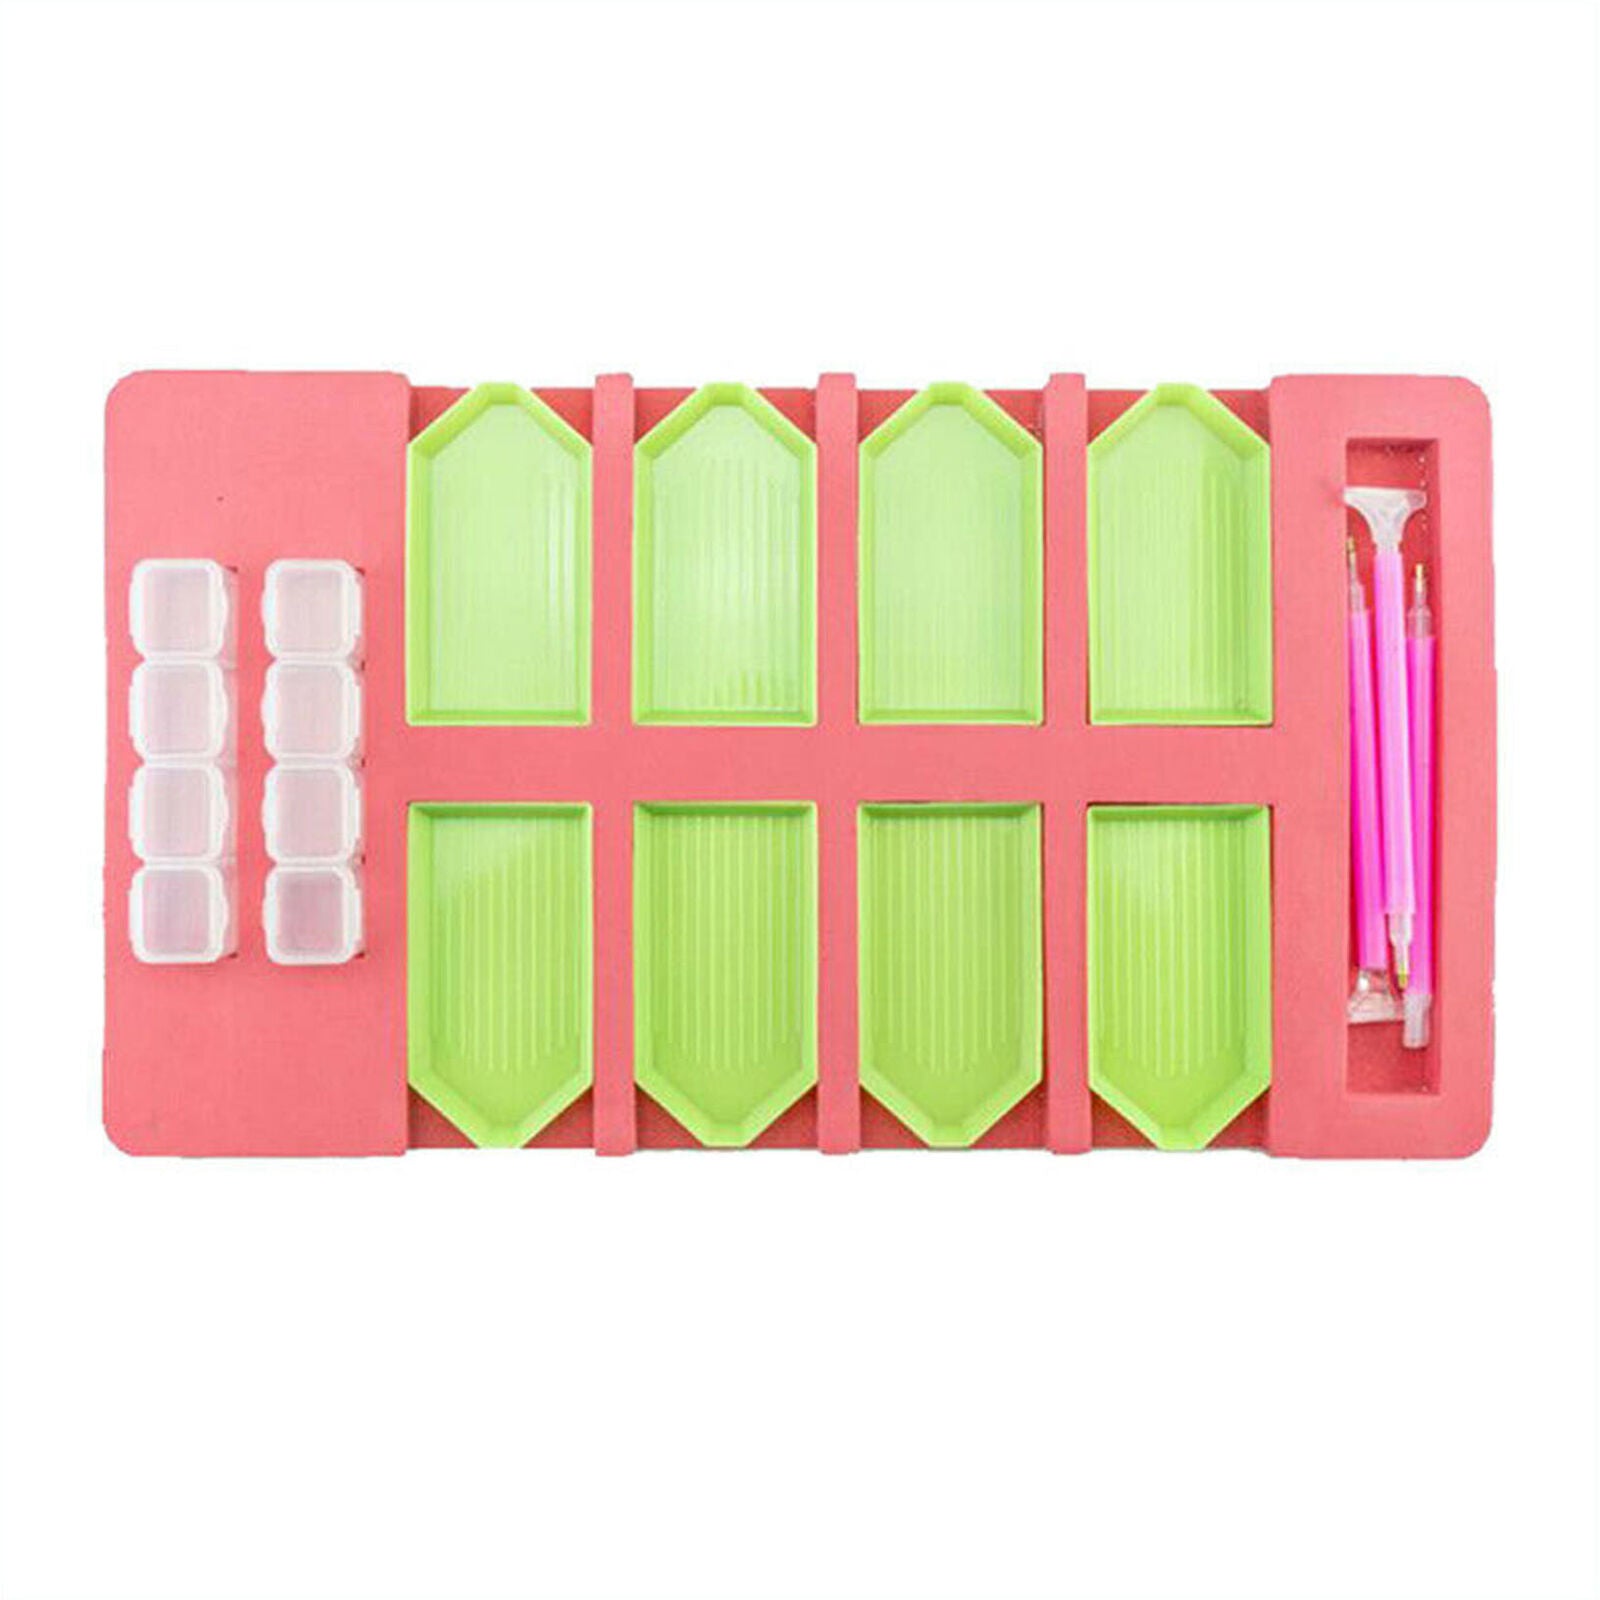 Tools & Accessories Tray Box Pens for 5D Diamond Painting Diamond DIY Embroidery